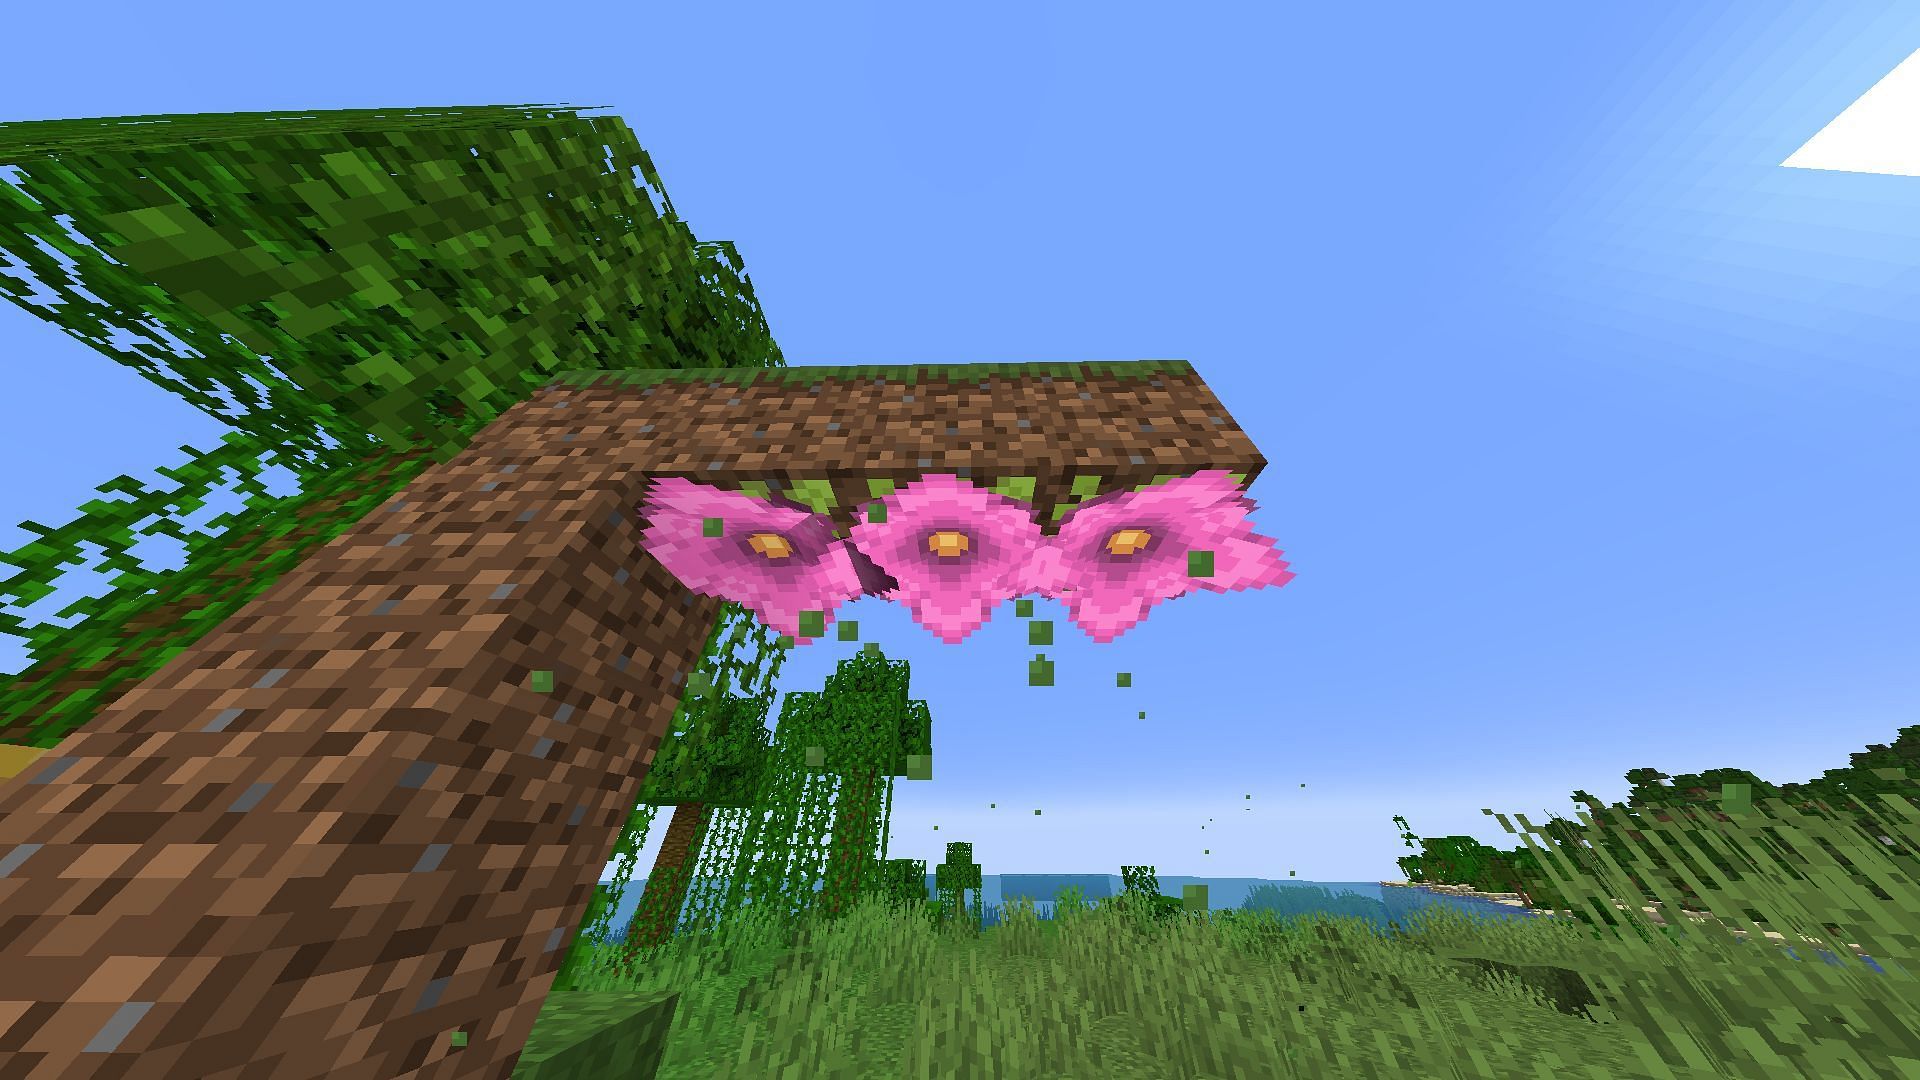 Spore Blossoms on dirt blocks on the surface (Image via Minecraft)